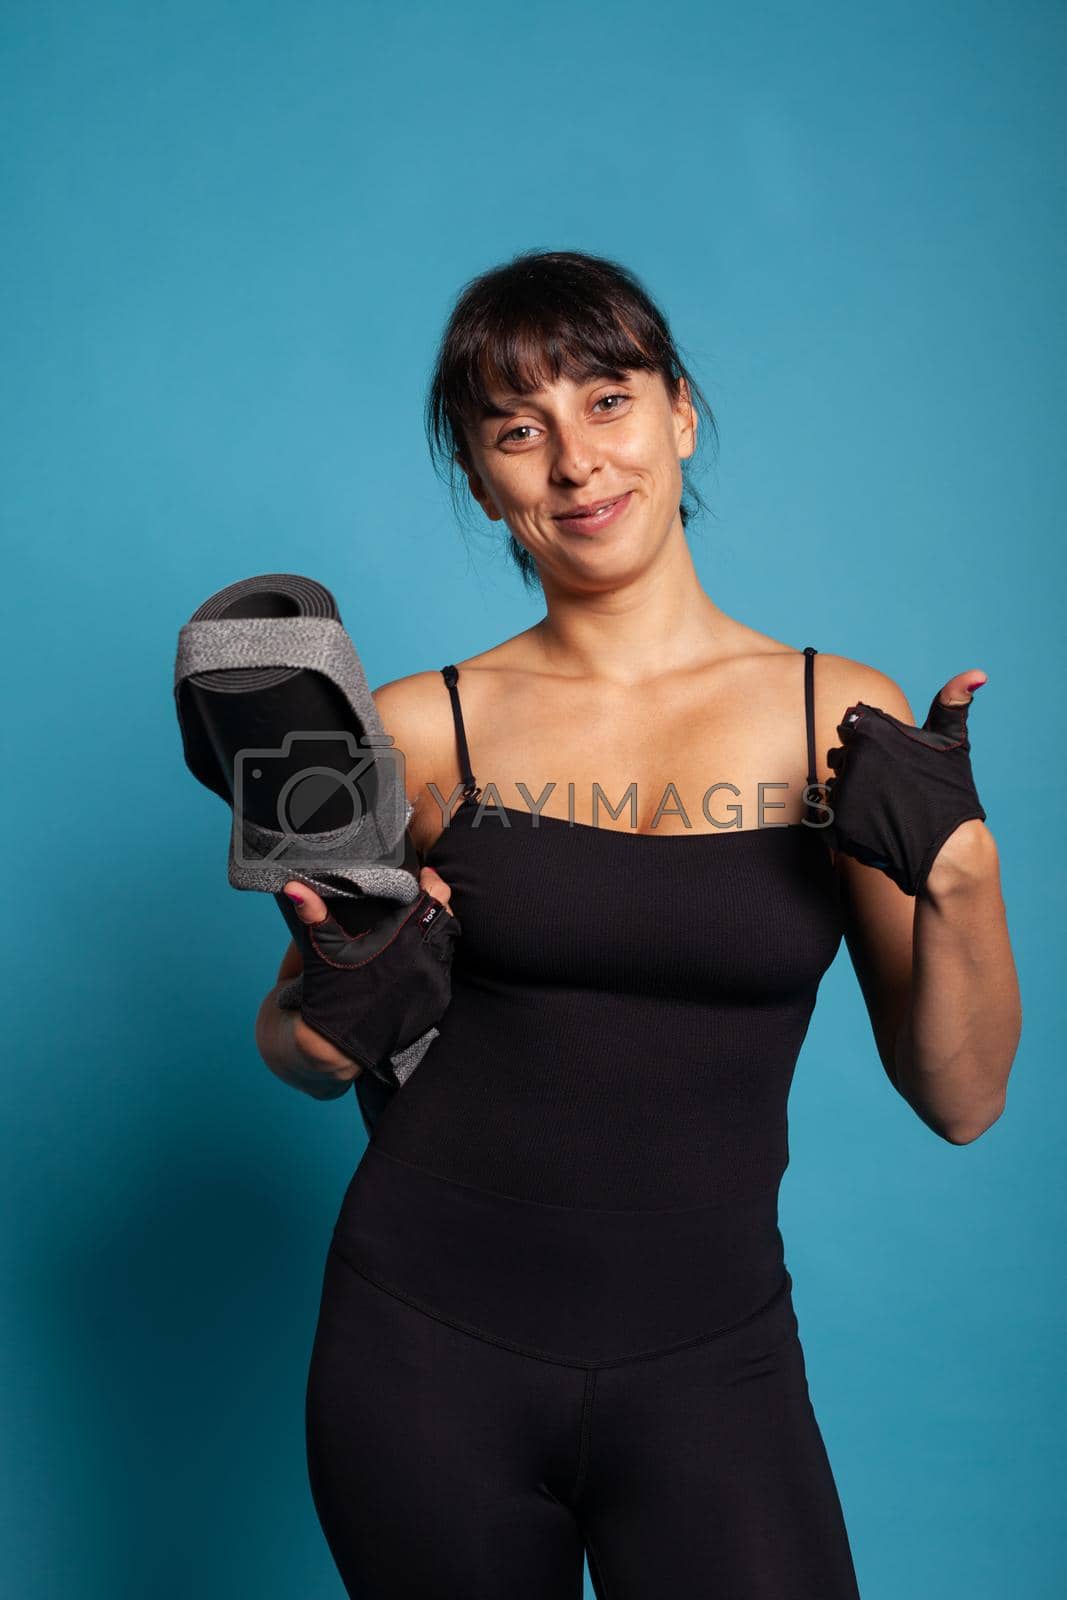 Portrait of athletic fit woman holding yoga mat before start working at fitness workout in studio. Personal trainer practicing gym exercices stretching body muscles working at healthy lifestyle